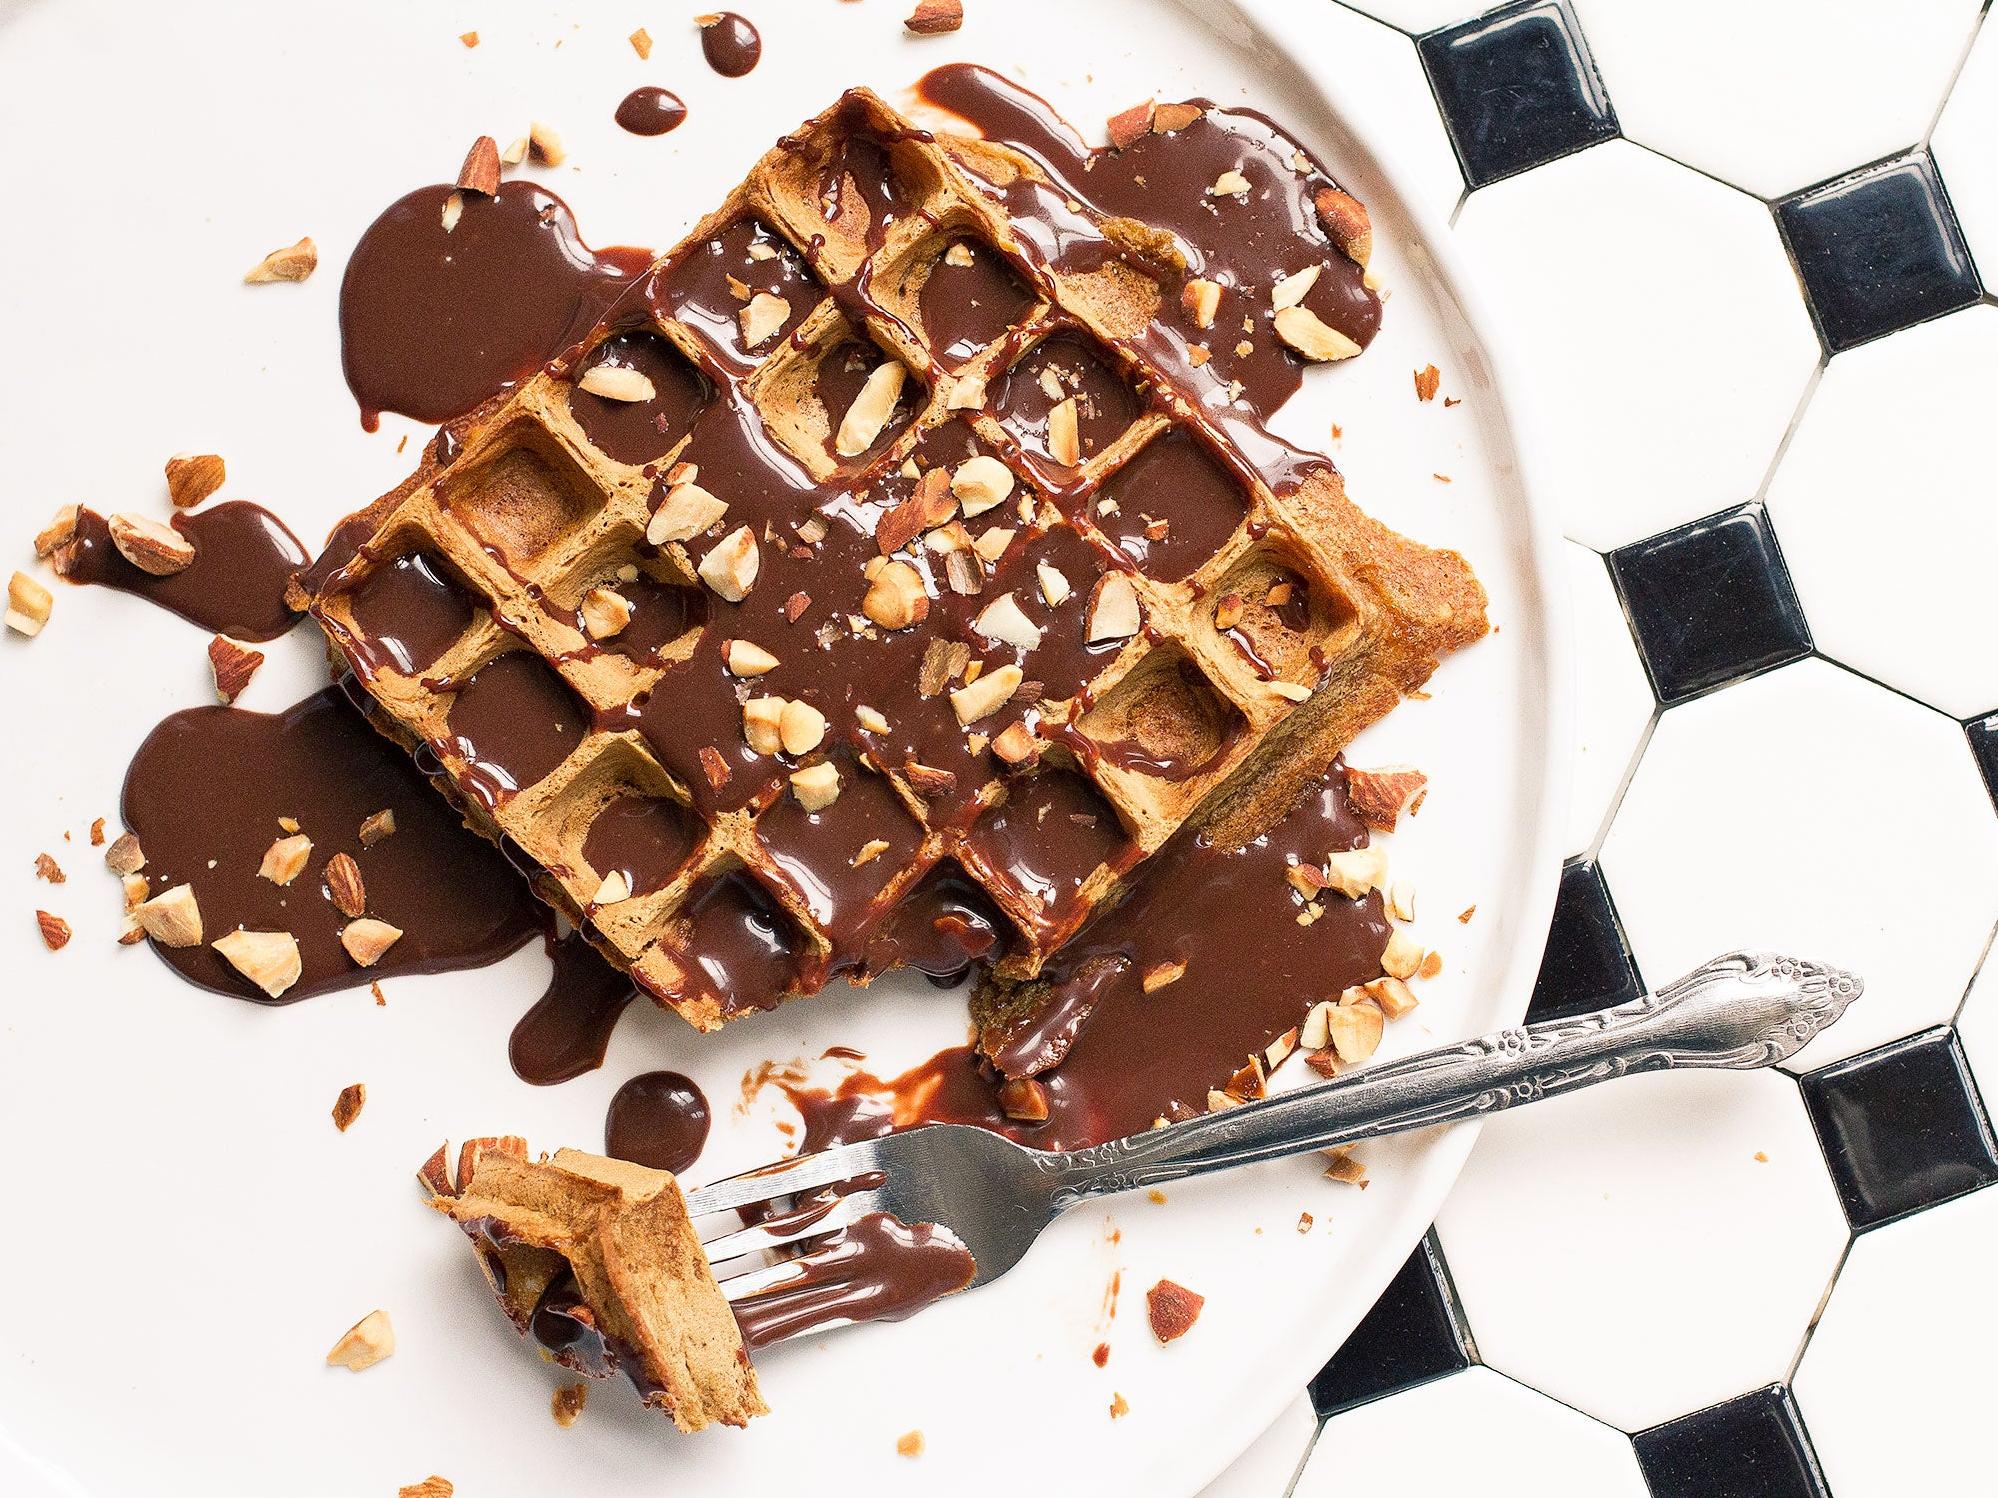  Who says waffles can't be for dessert? Try this Coffee Chocolate Waffle recipe for a decadent treat.